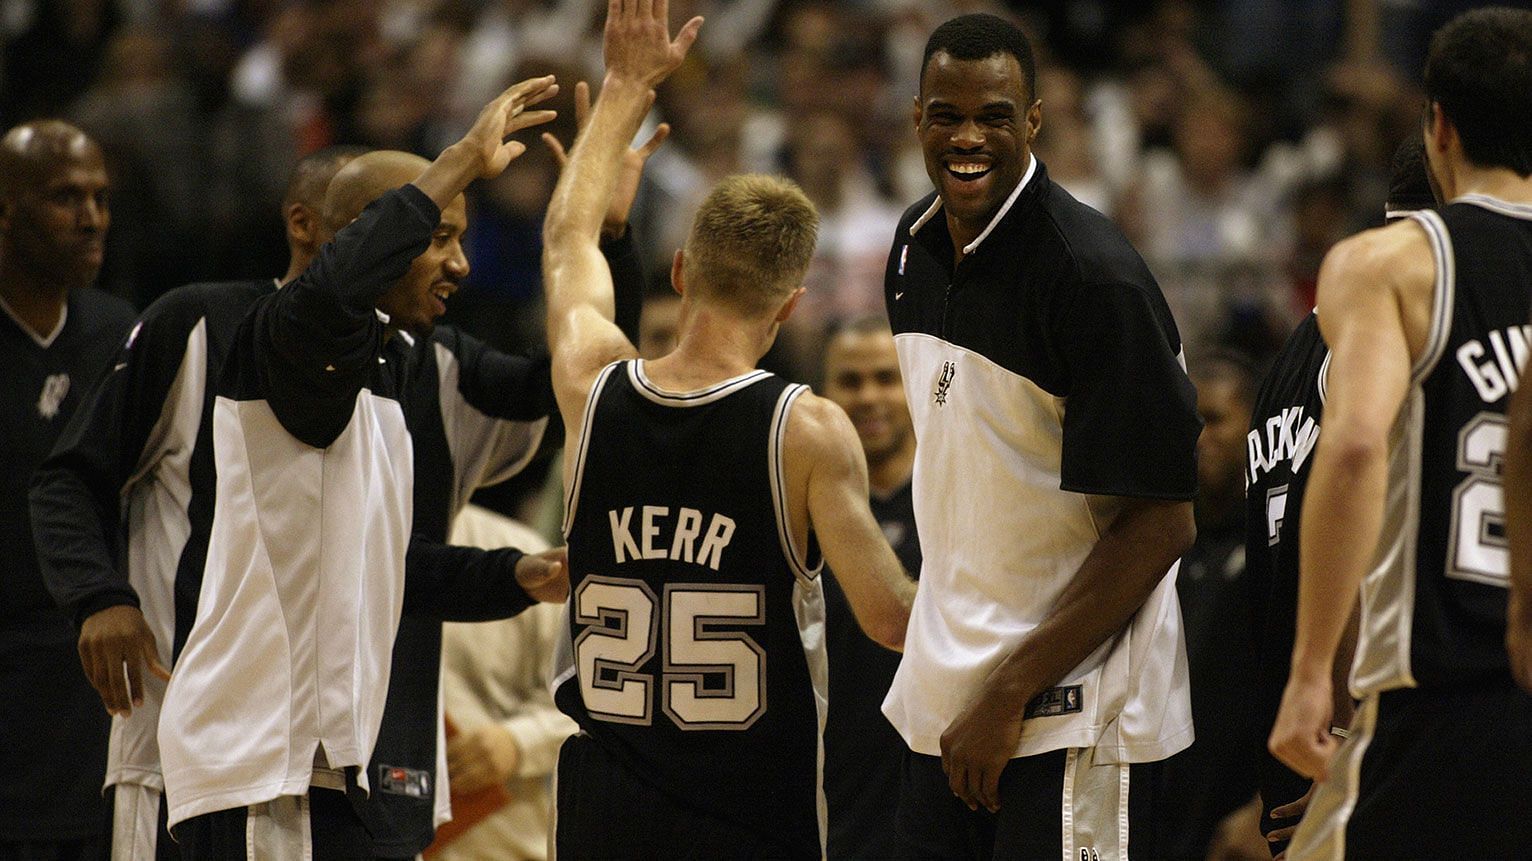 Like the Chicago Bulls, Steve Kerr played for two defensively dominant San Antonio Spurs teams that won titles. [Photo: Grantland]